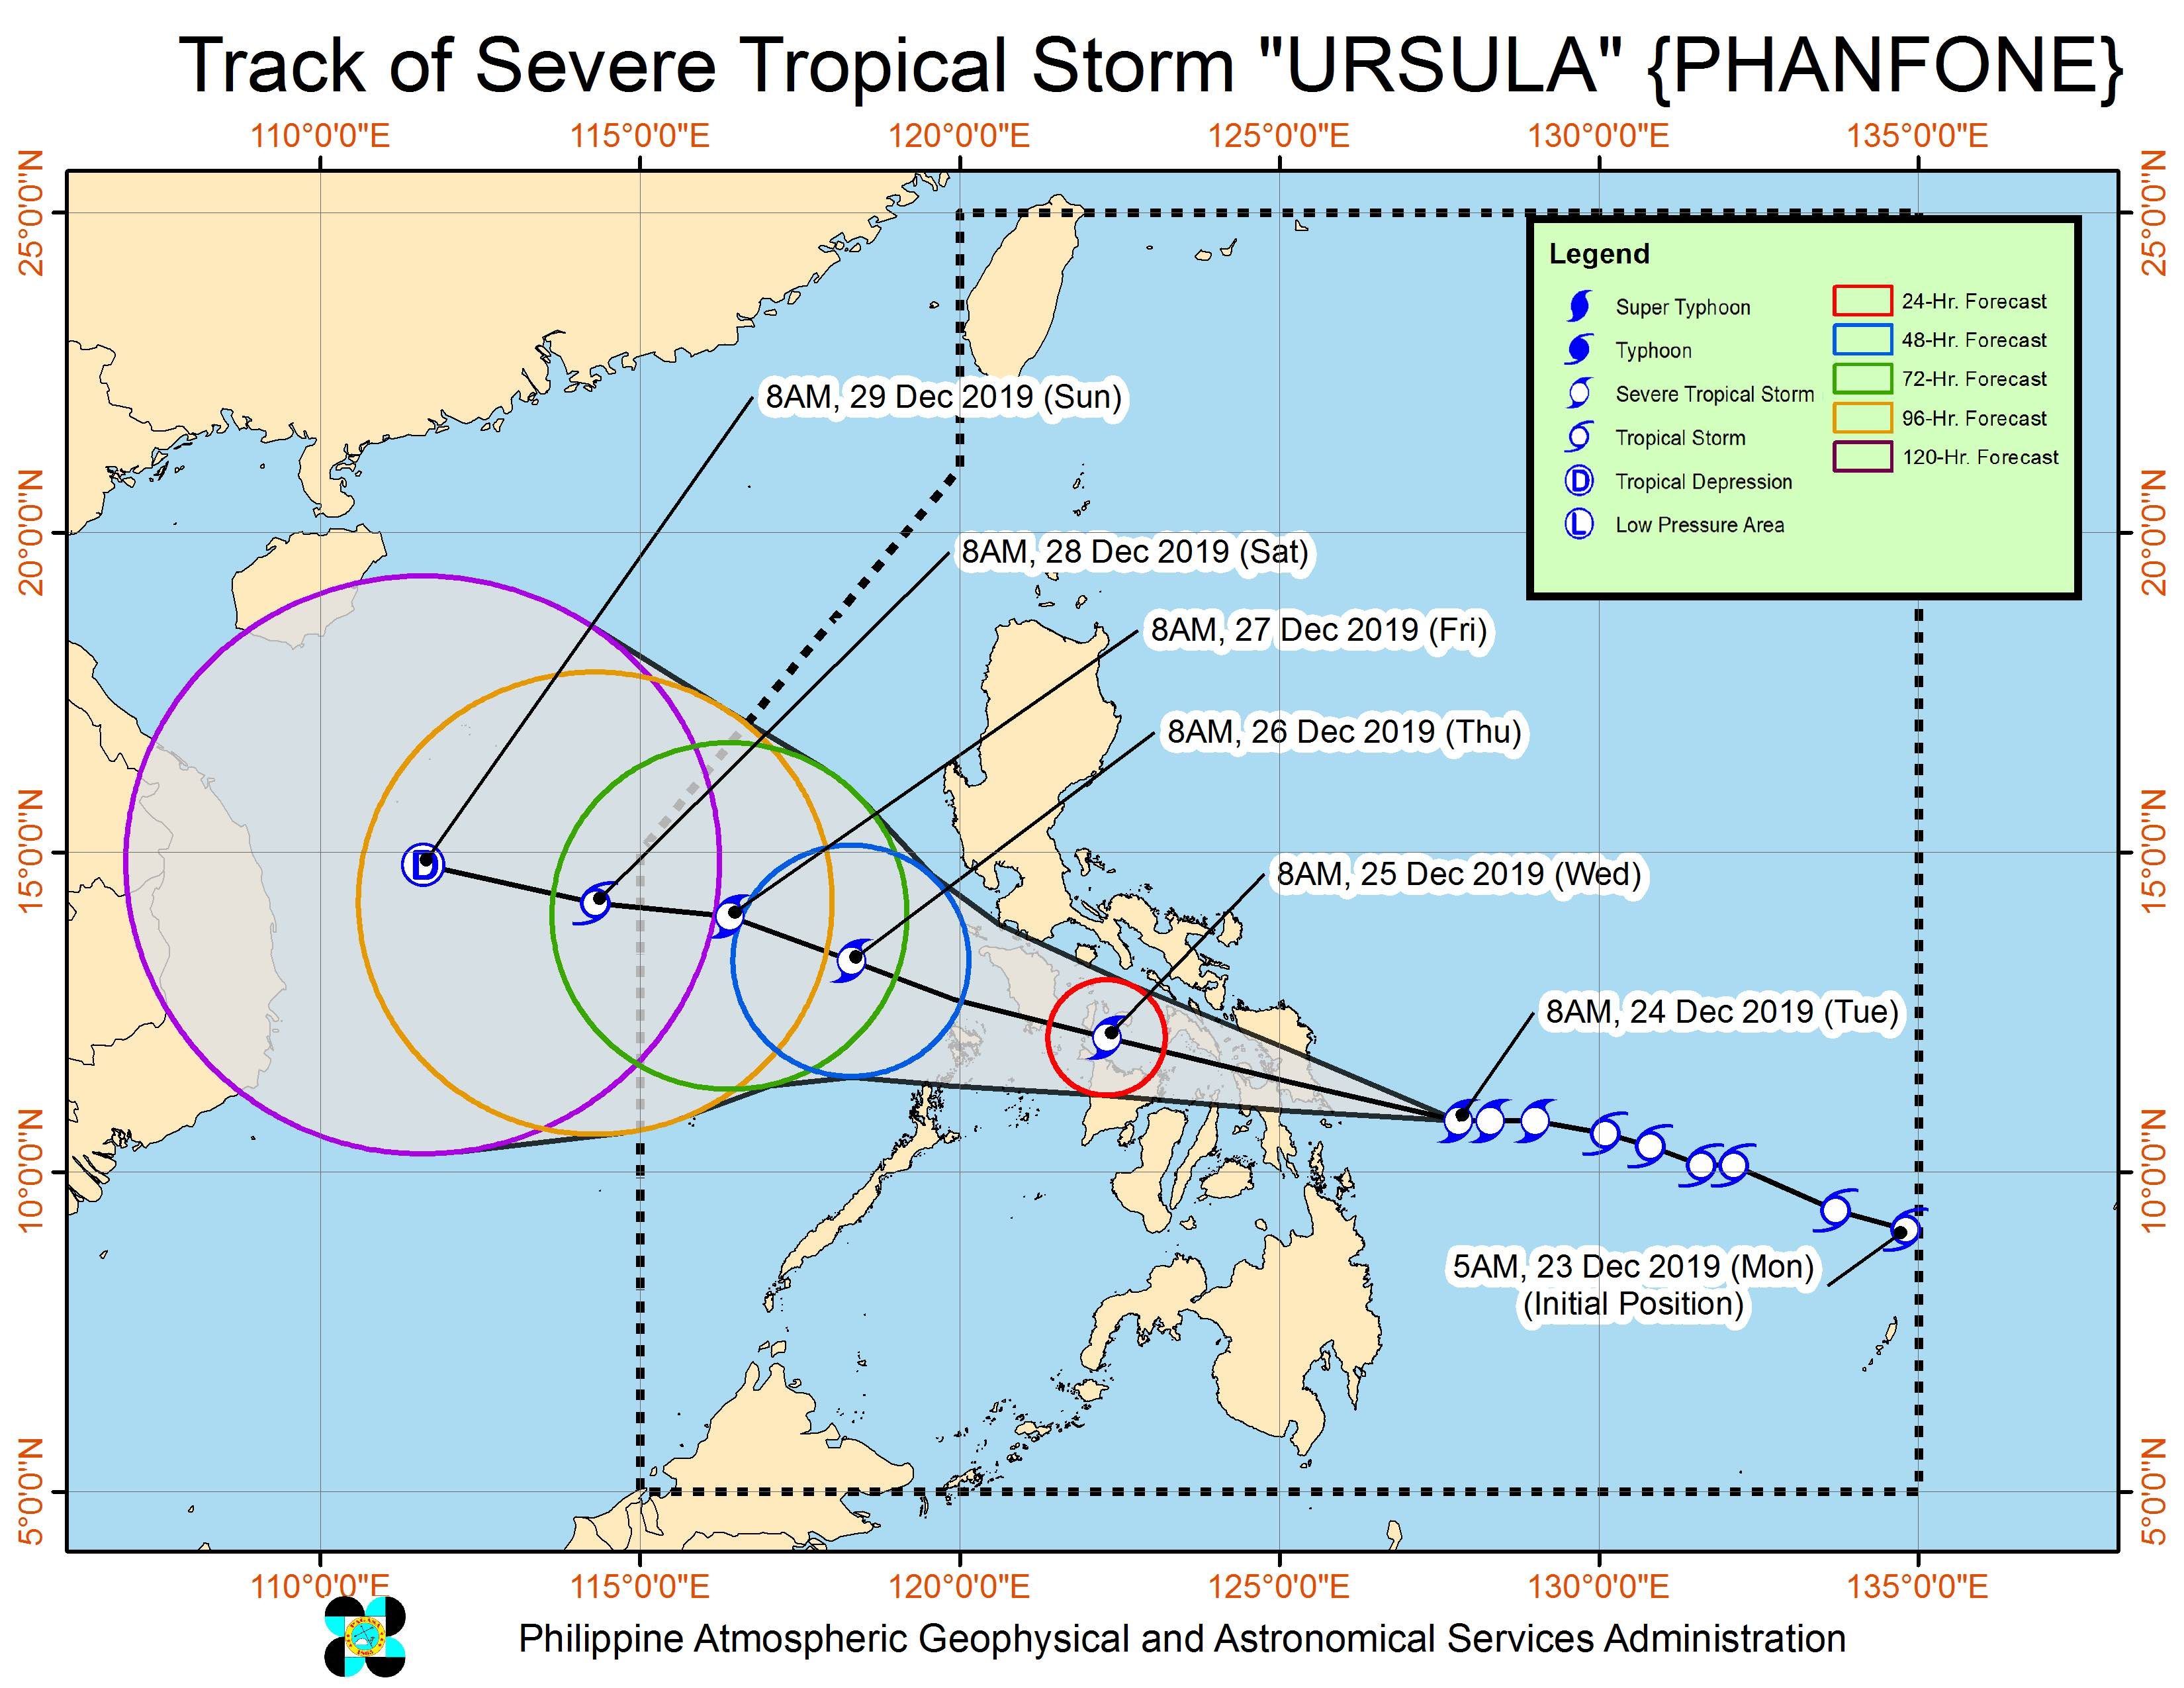 Forecast track of Severe Tropical Storm Ursula (Phanfone) as of December 24, 2019, 11 am. Image from PAGASA 